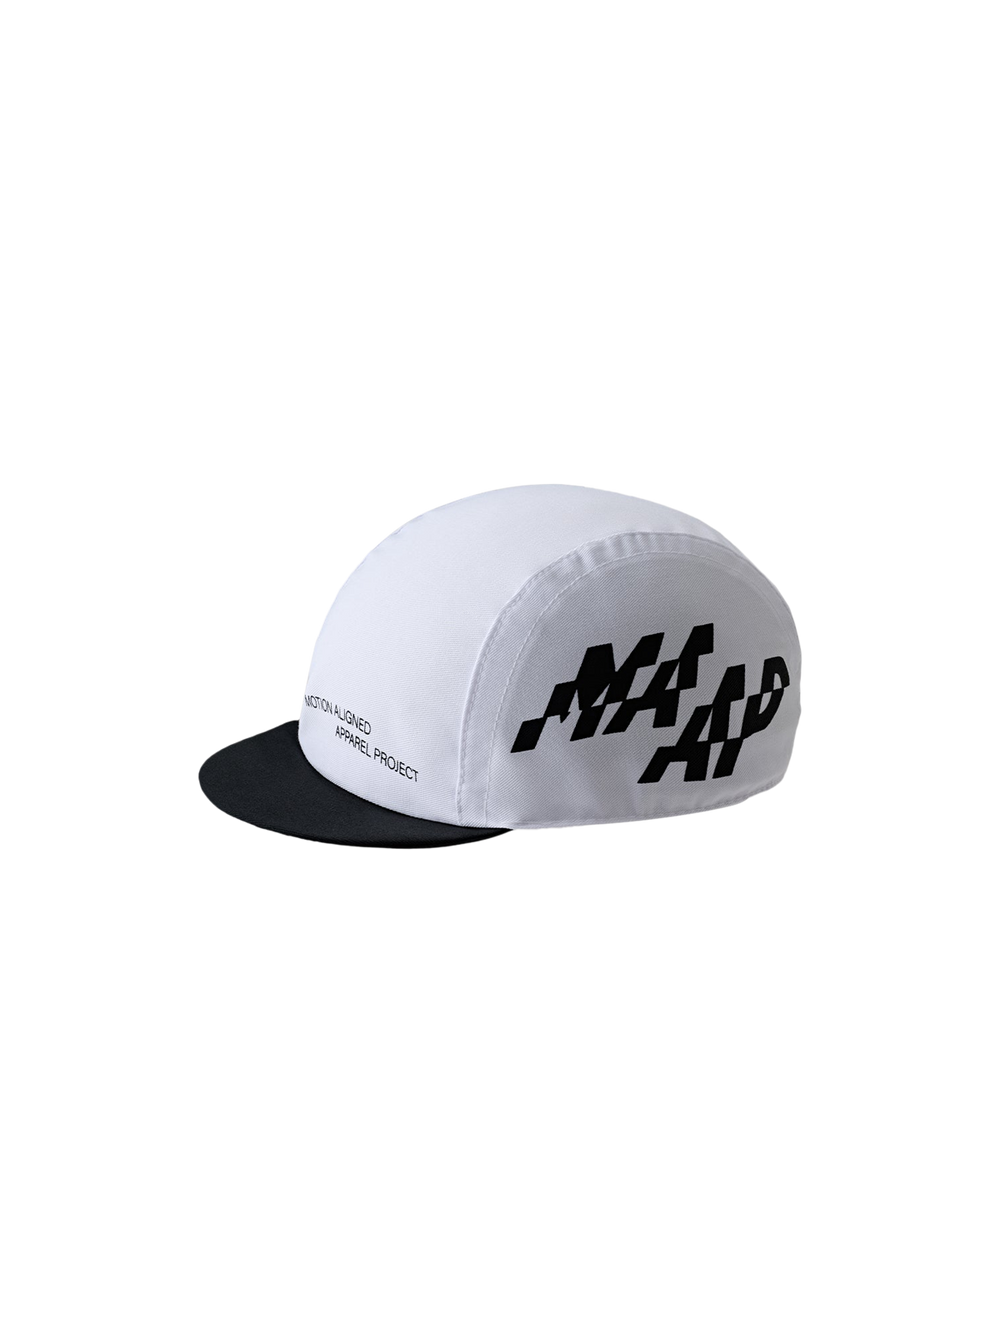 Product Image for Fragment Cap